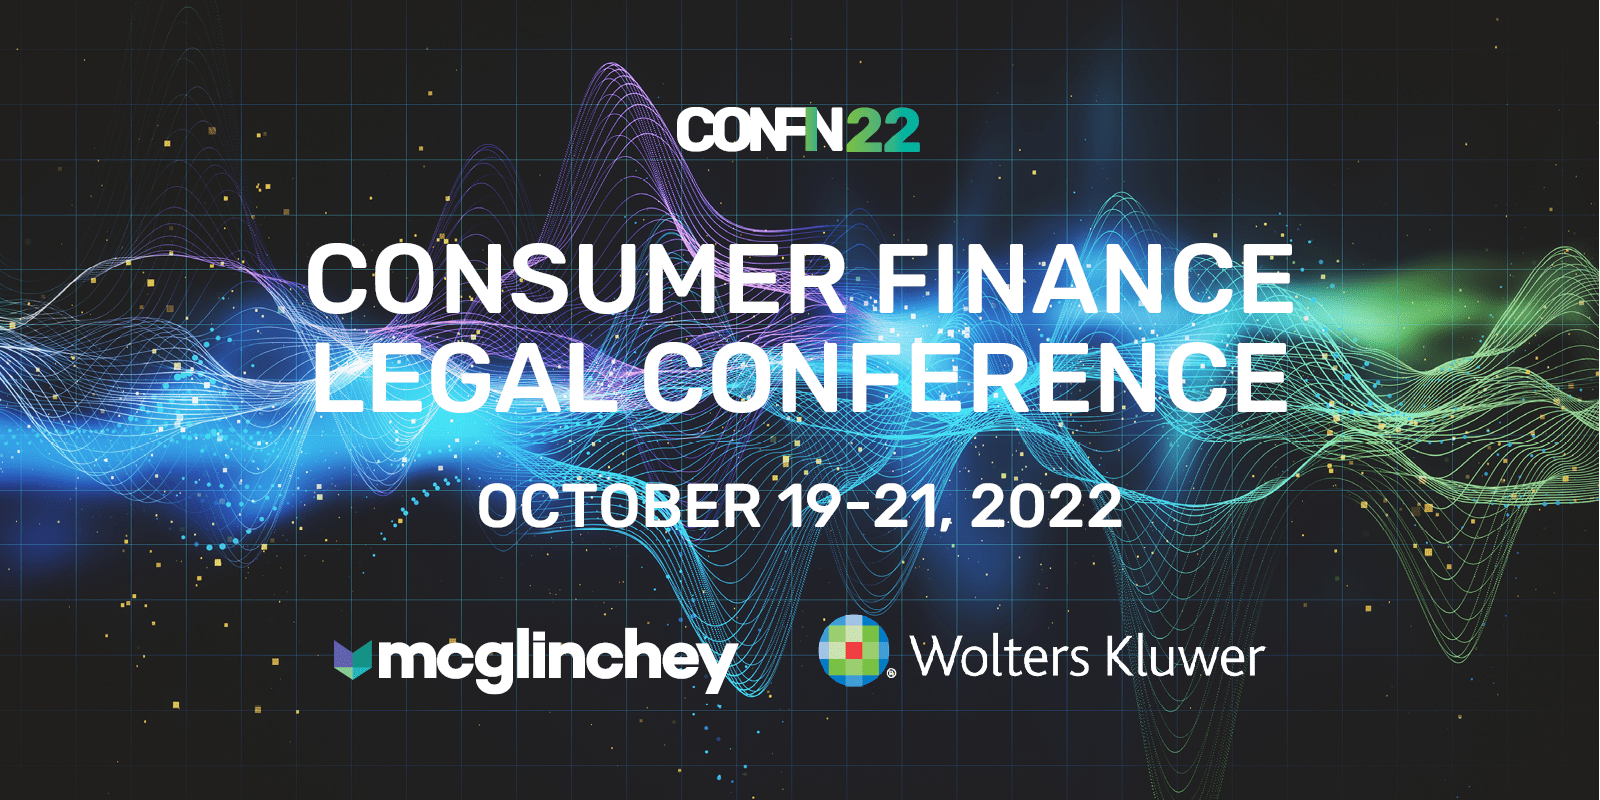 Media item displaying 2022 Consumer Finance Legal Conference